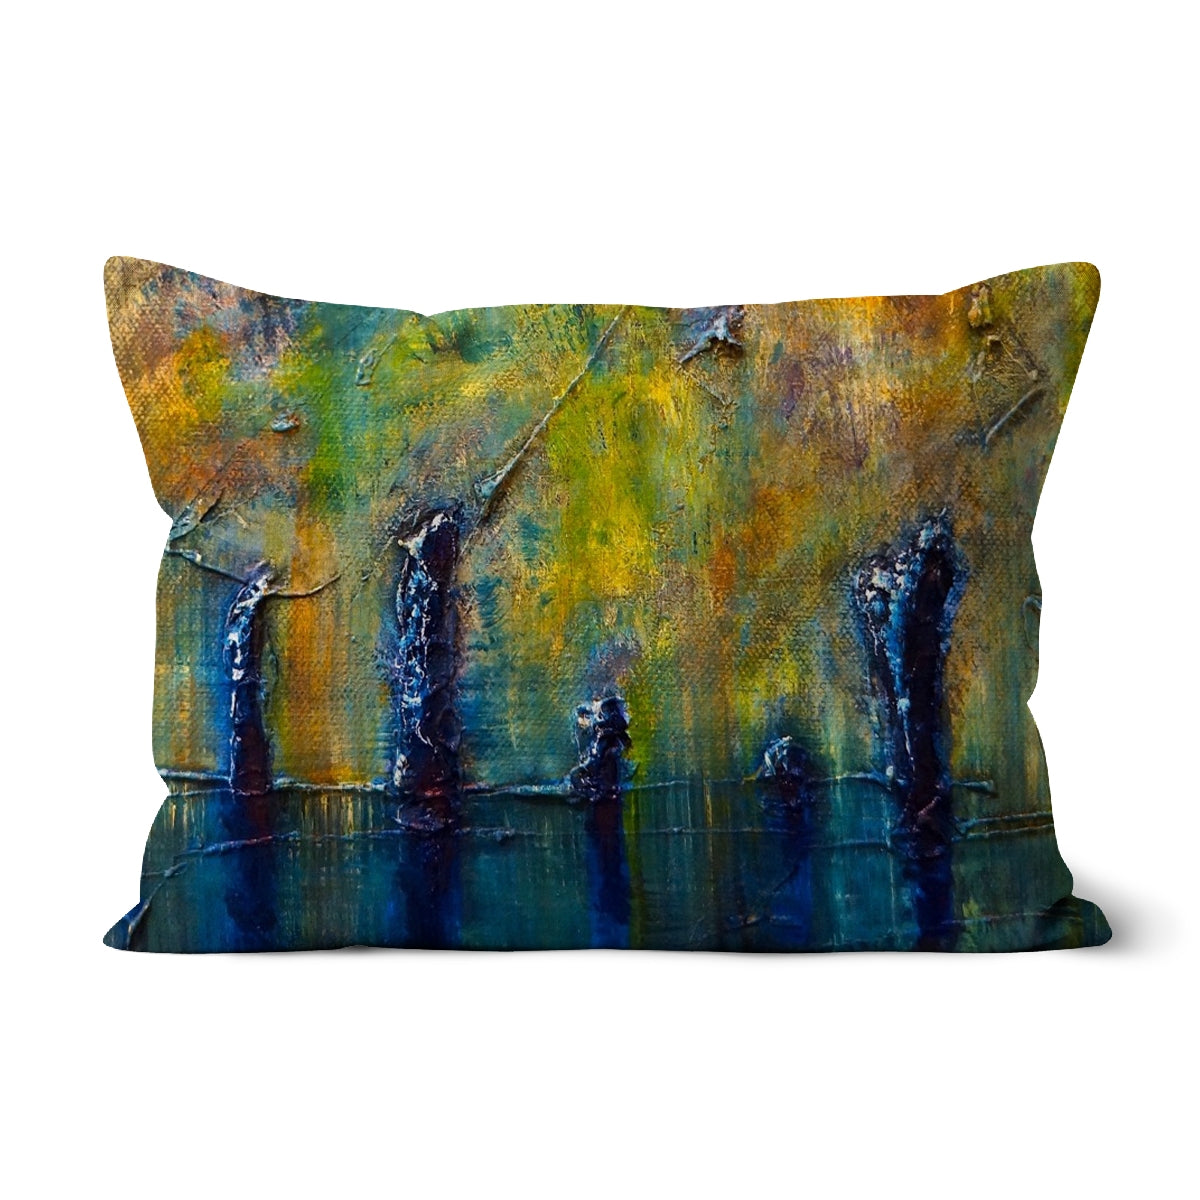 Stenness Moonlight Orkney Art Gifts Cushion-Cushions-Orkney Art Gallery-Faux Suede-19"x13"-Paintings, Prints, Homeware, Art Gifts From Scotland By Scottish Artist Kevin Hunter